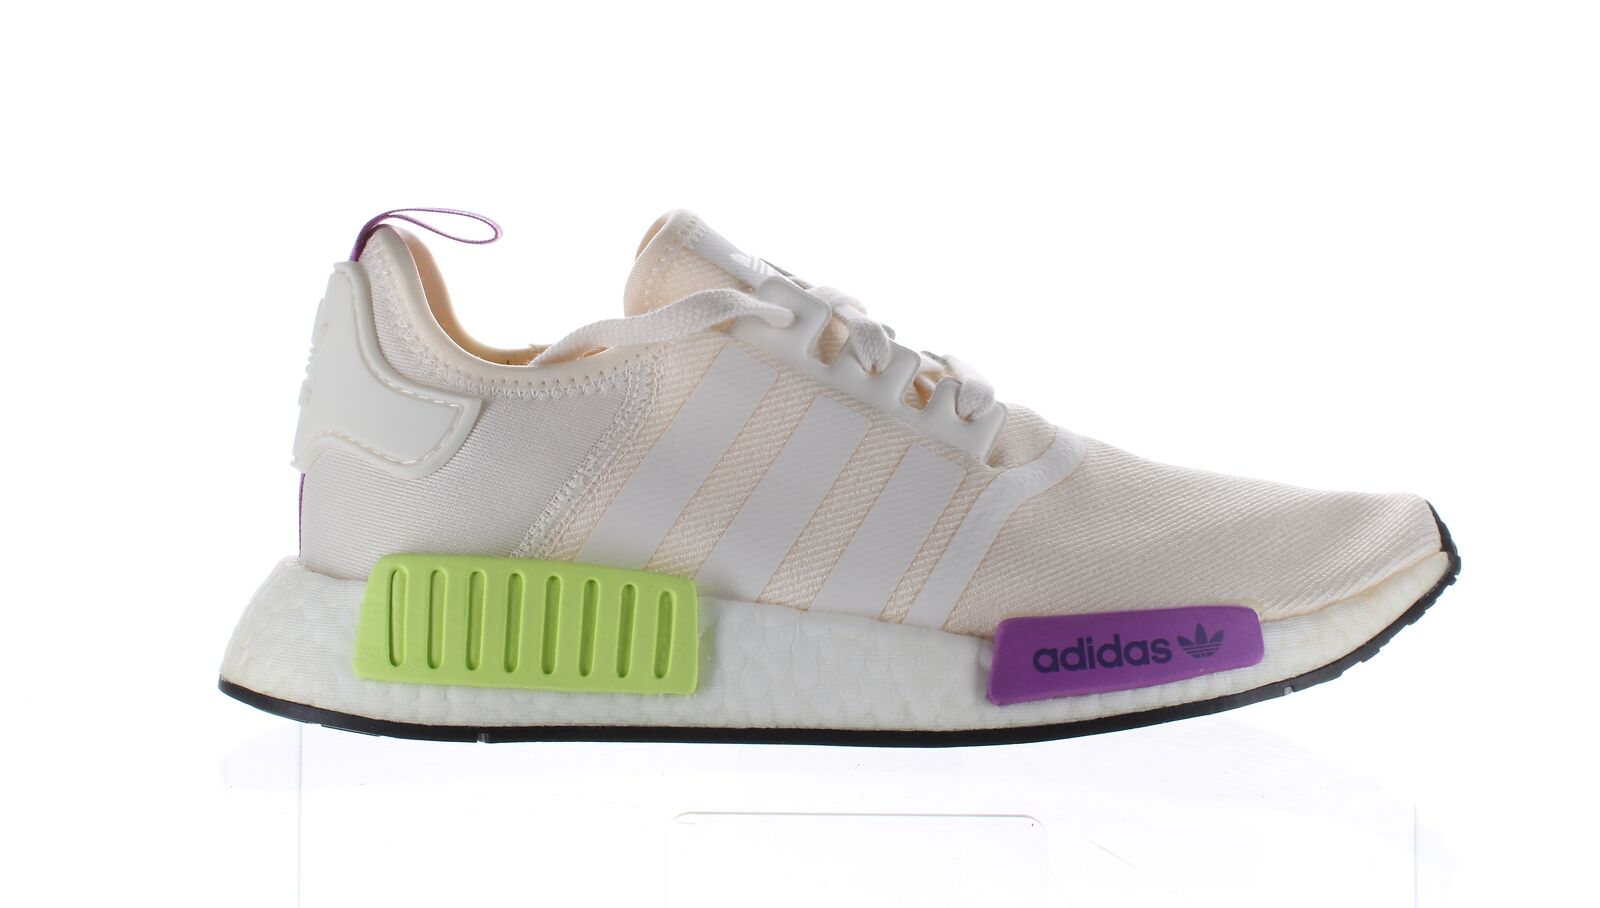 Adidas Mens Nmd_R1 Beige Running Shoes Size 9.5 (2280058)